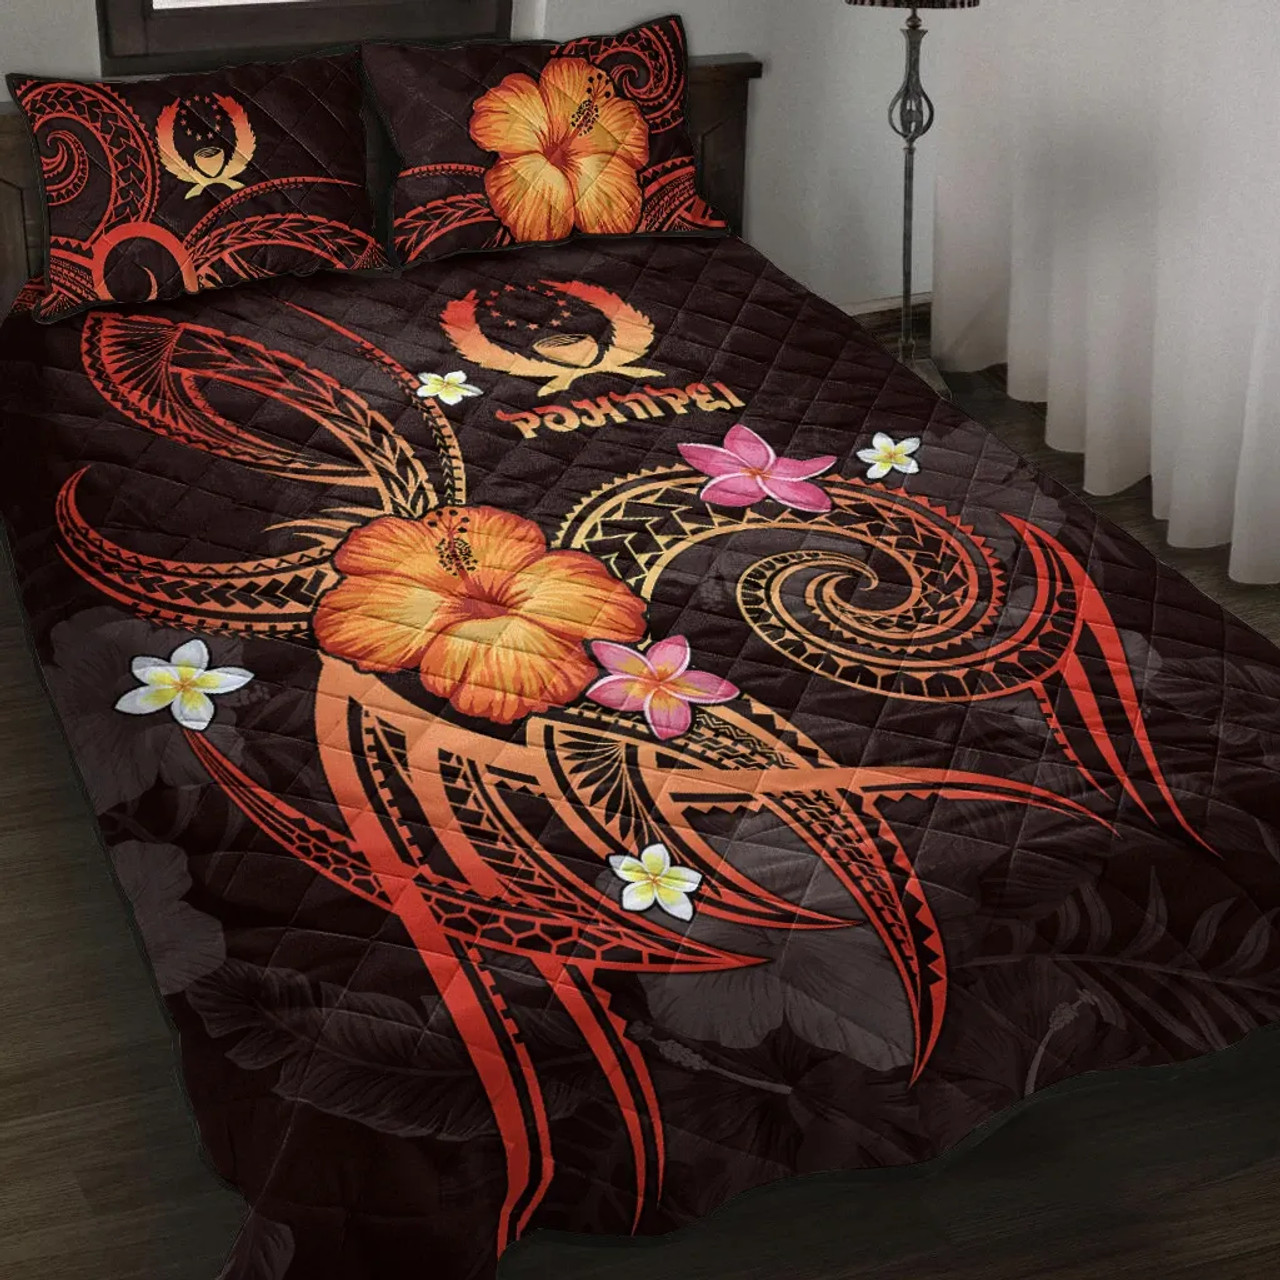 Pohnpei Polynesian Quilt Bed Set - Legend of Pohnpei (Red) 1